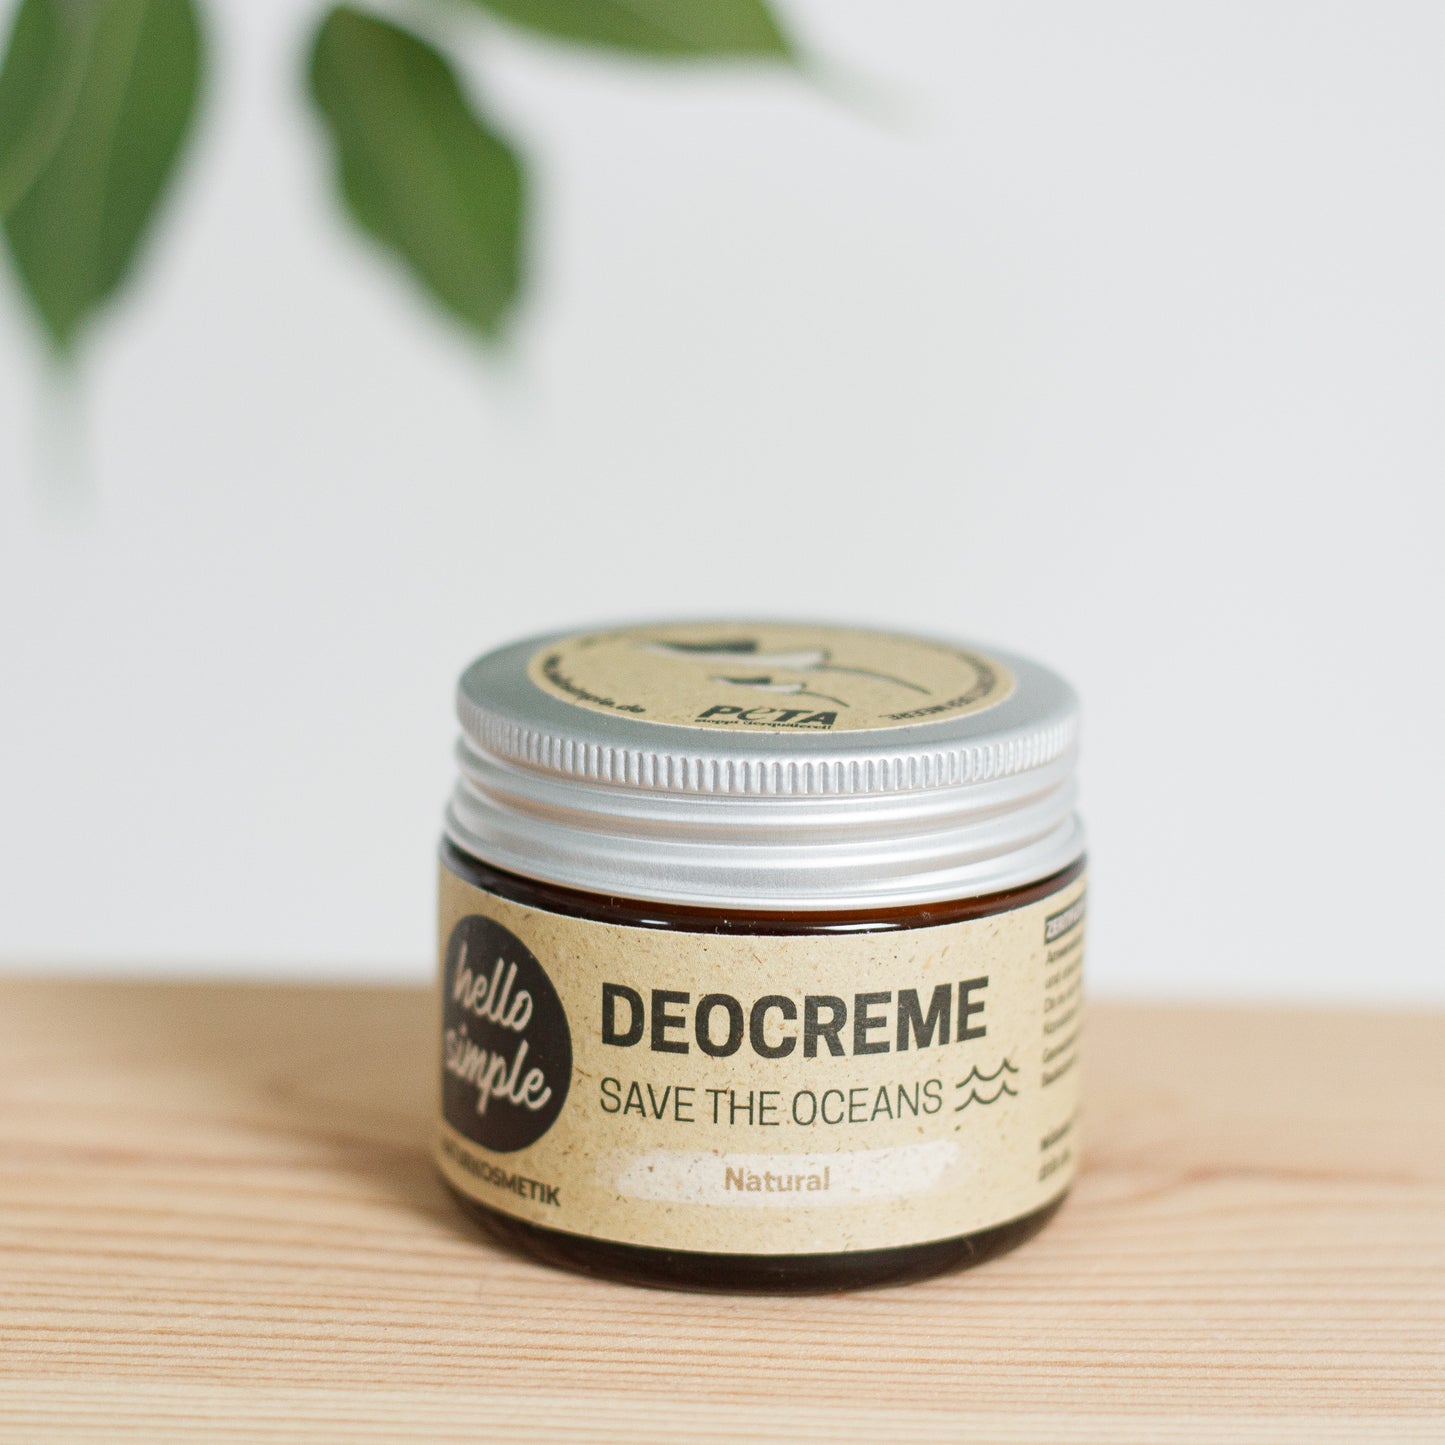 Deocreme "Save the oceans" Natural